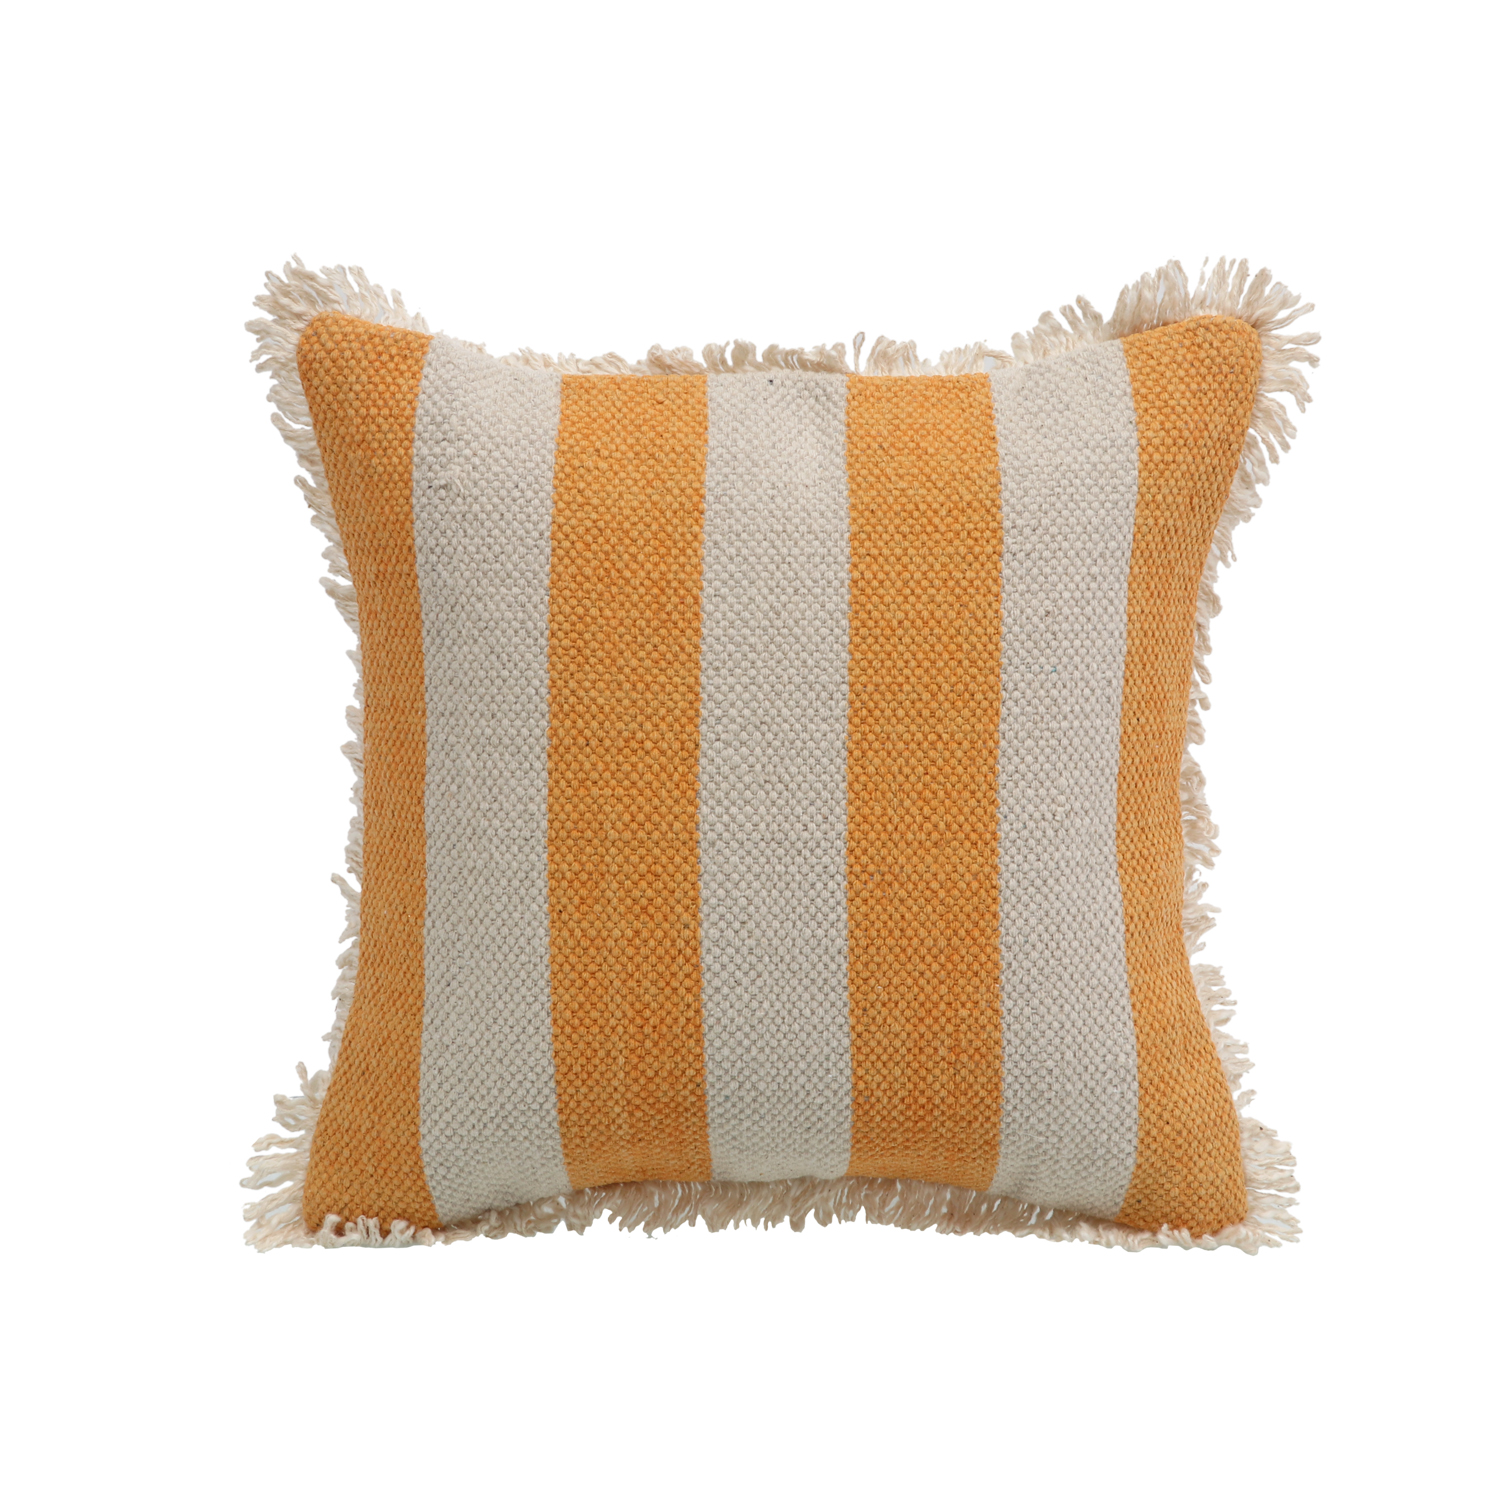 Printed Stripe Yellow Cushions Covers with fringes 14X14 Inch